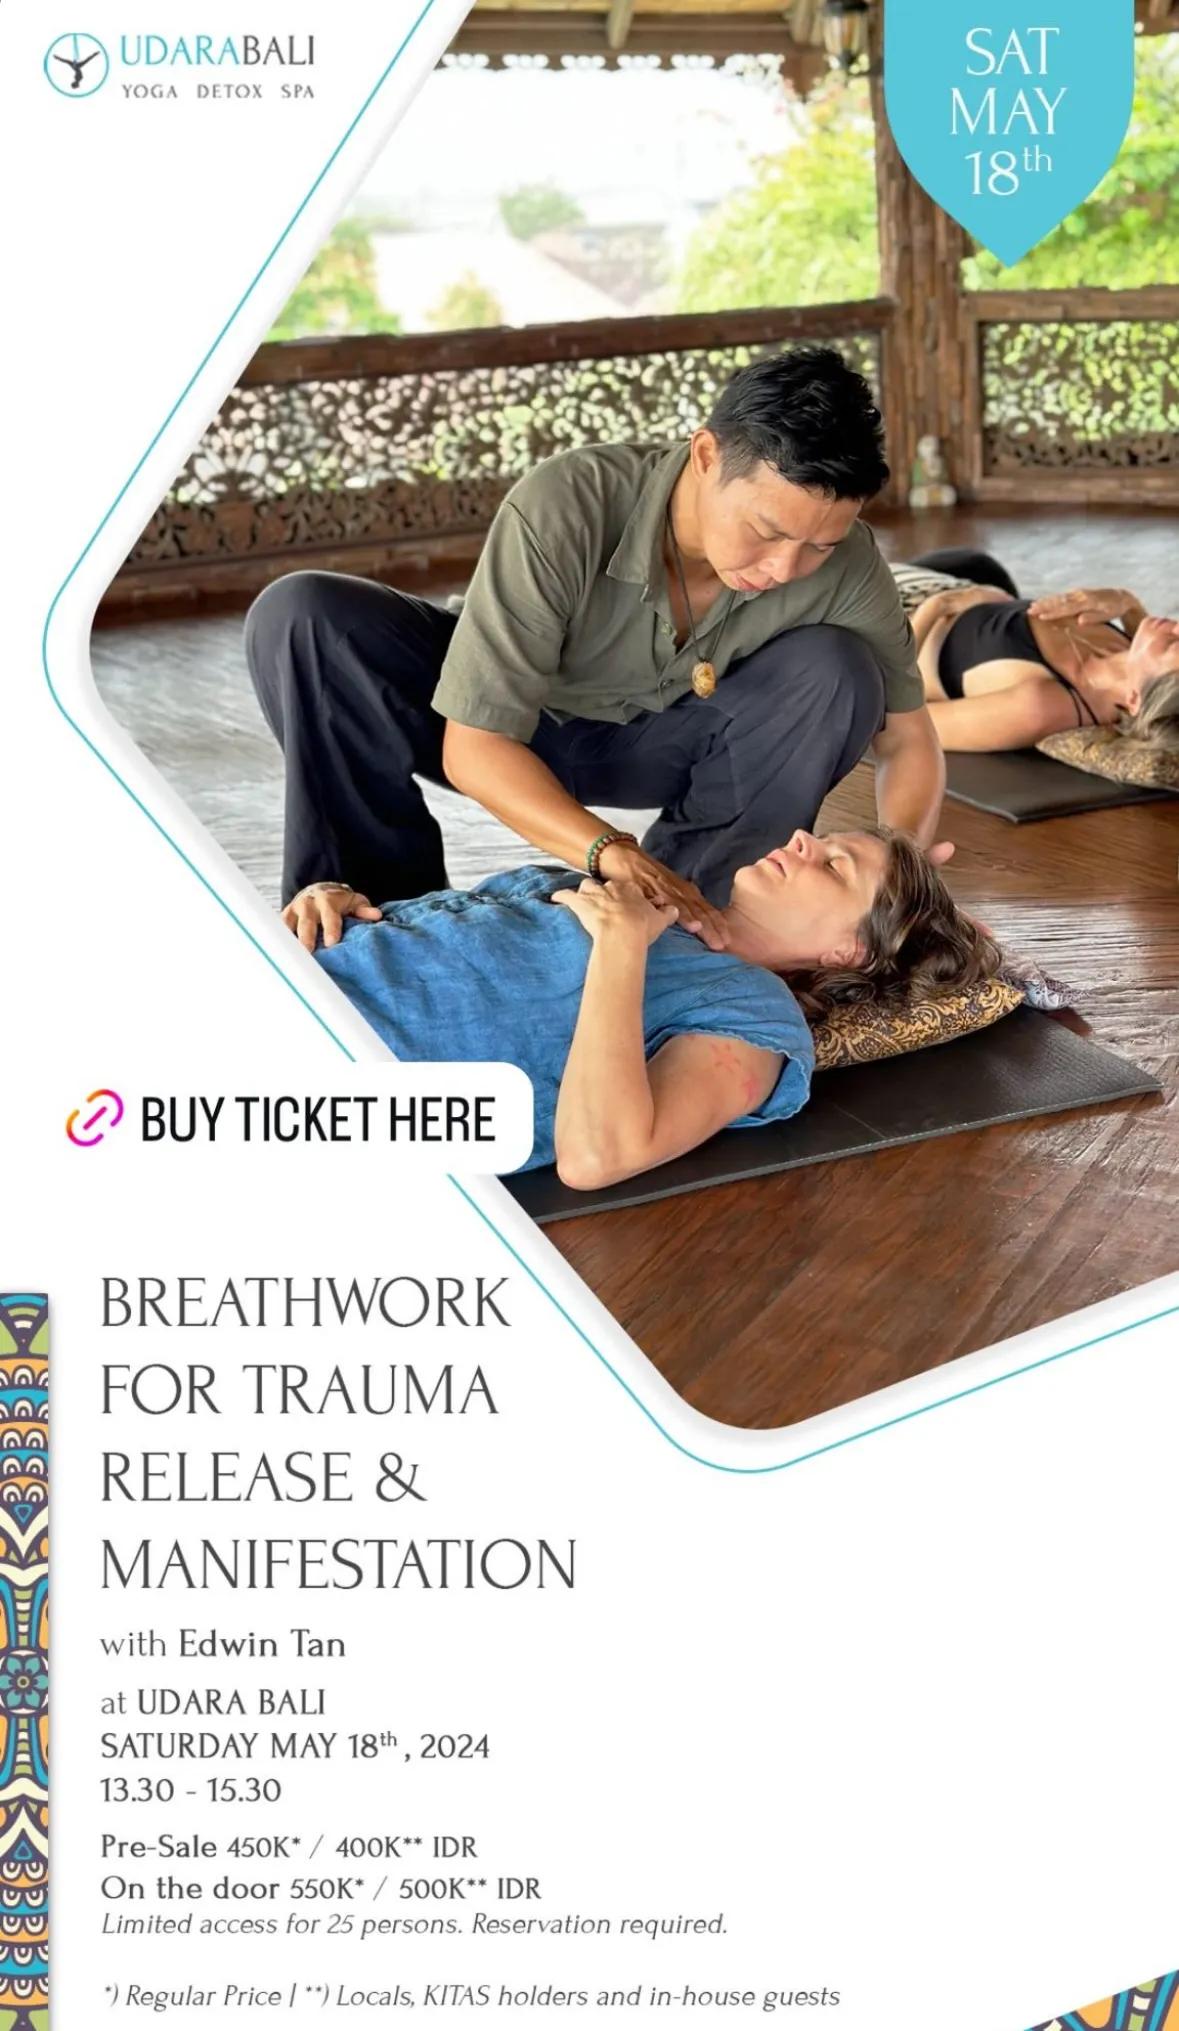 Event at Udara on May 18 2024: Breathwork For Trauma Release & Manifestation